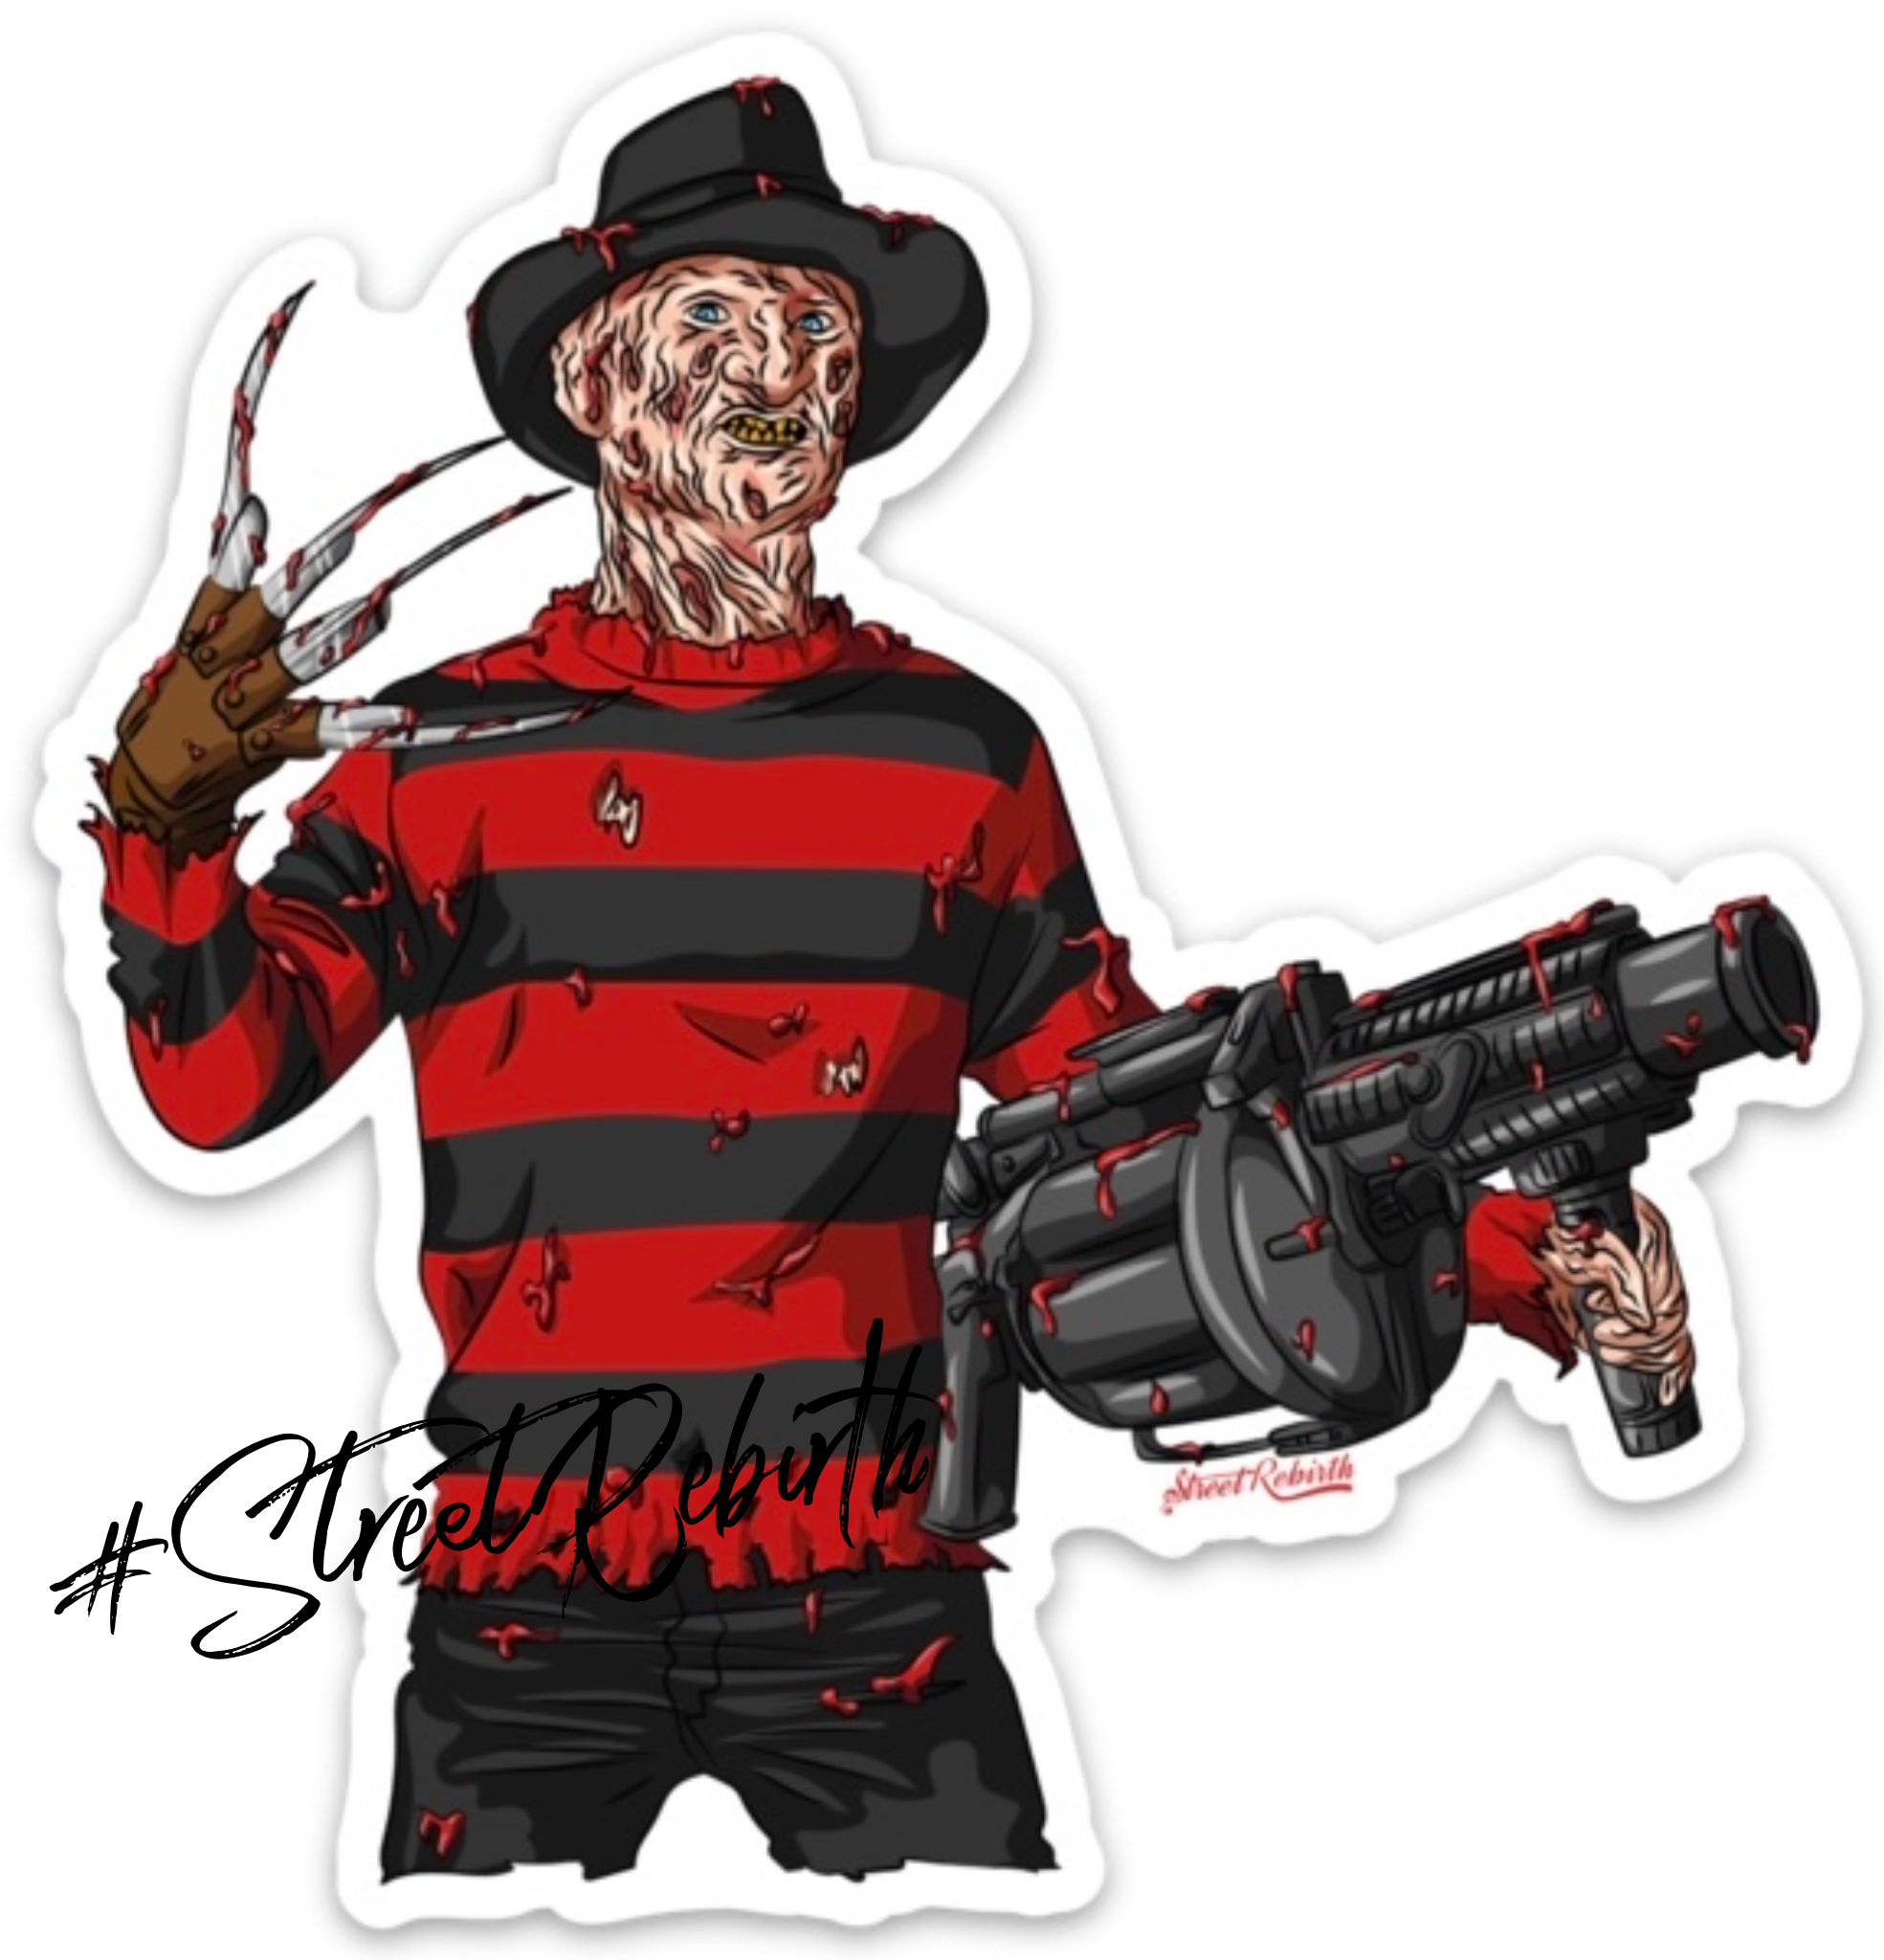 Freddy With Grenade Launcher Sticker – One 4 Inch Water Proof Vinyl Sticker – For Hydro Flask, Skateboard, Laptop, Planner, Car, Collecting, Gifting